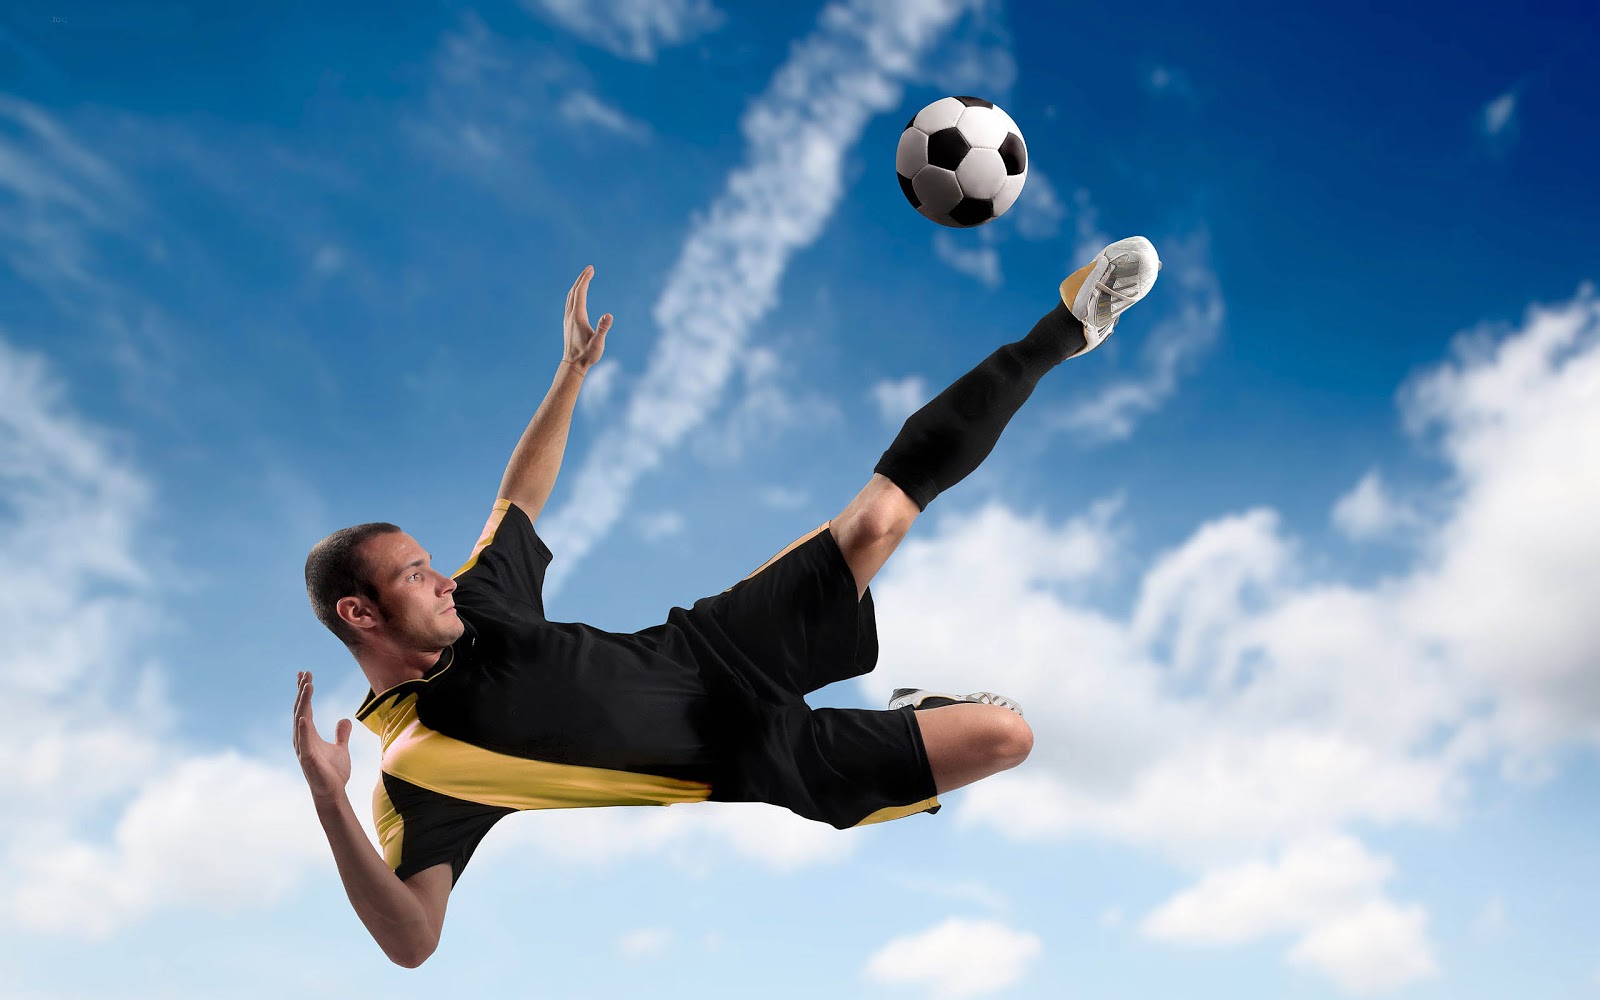 Download image Sports Desktop Soccer Backgrounds PC Android iPhone